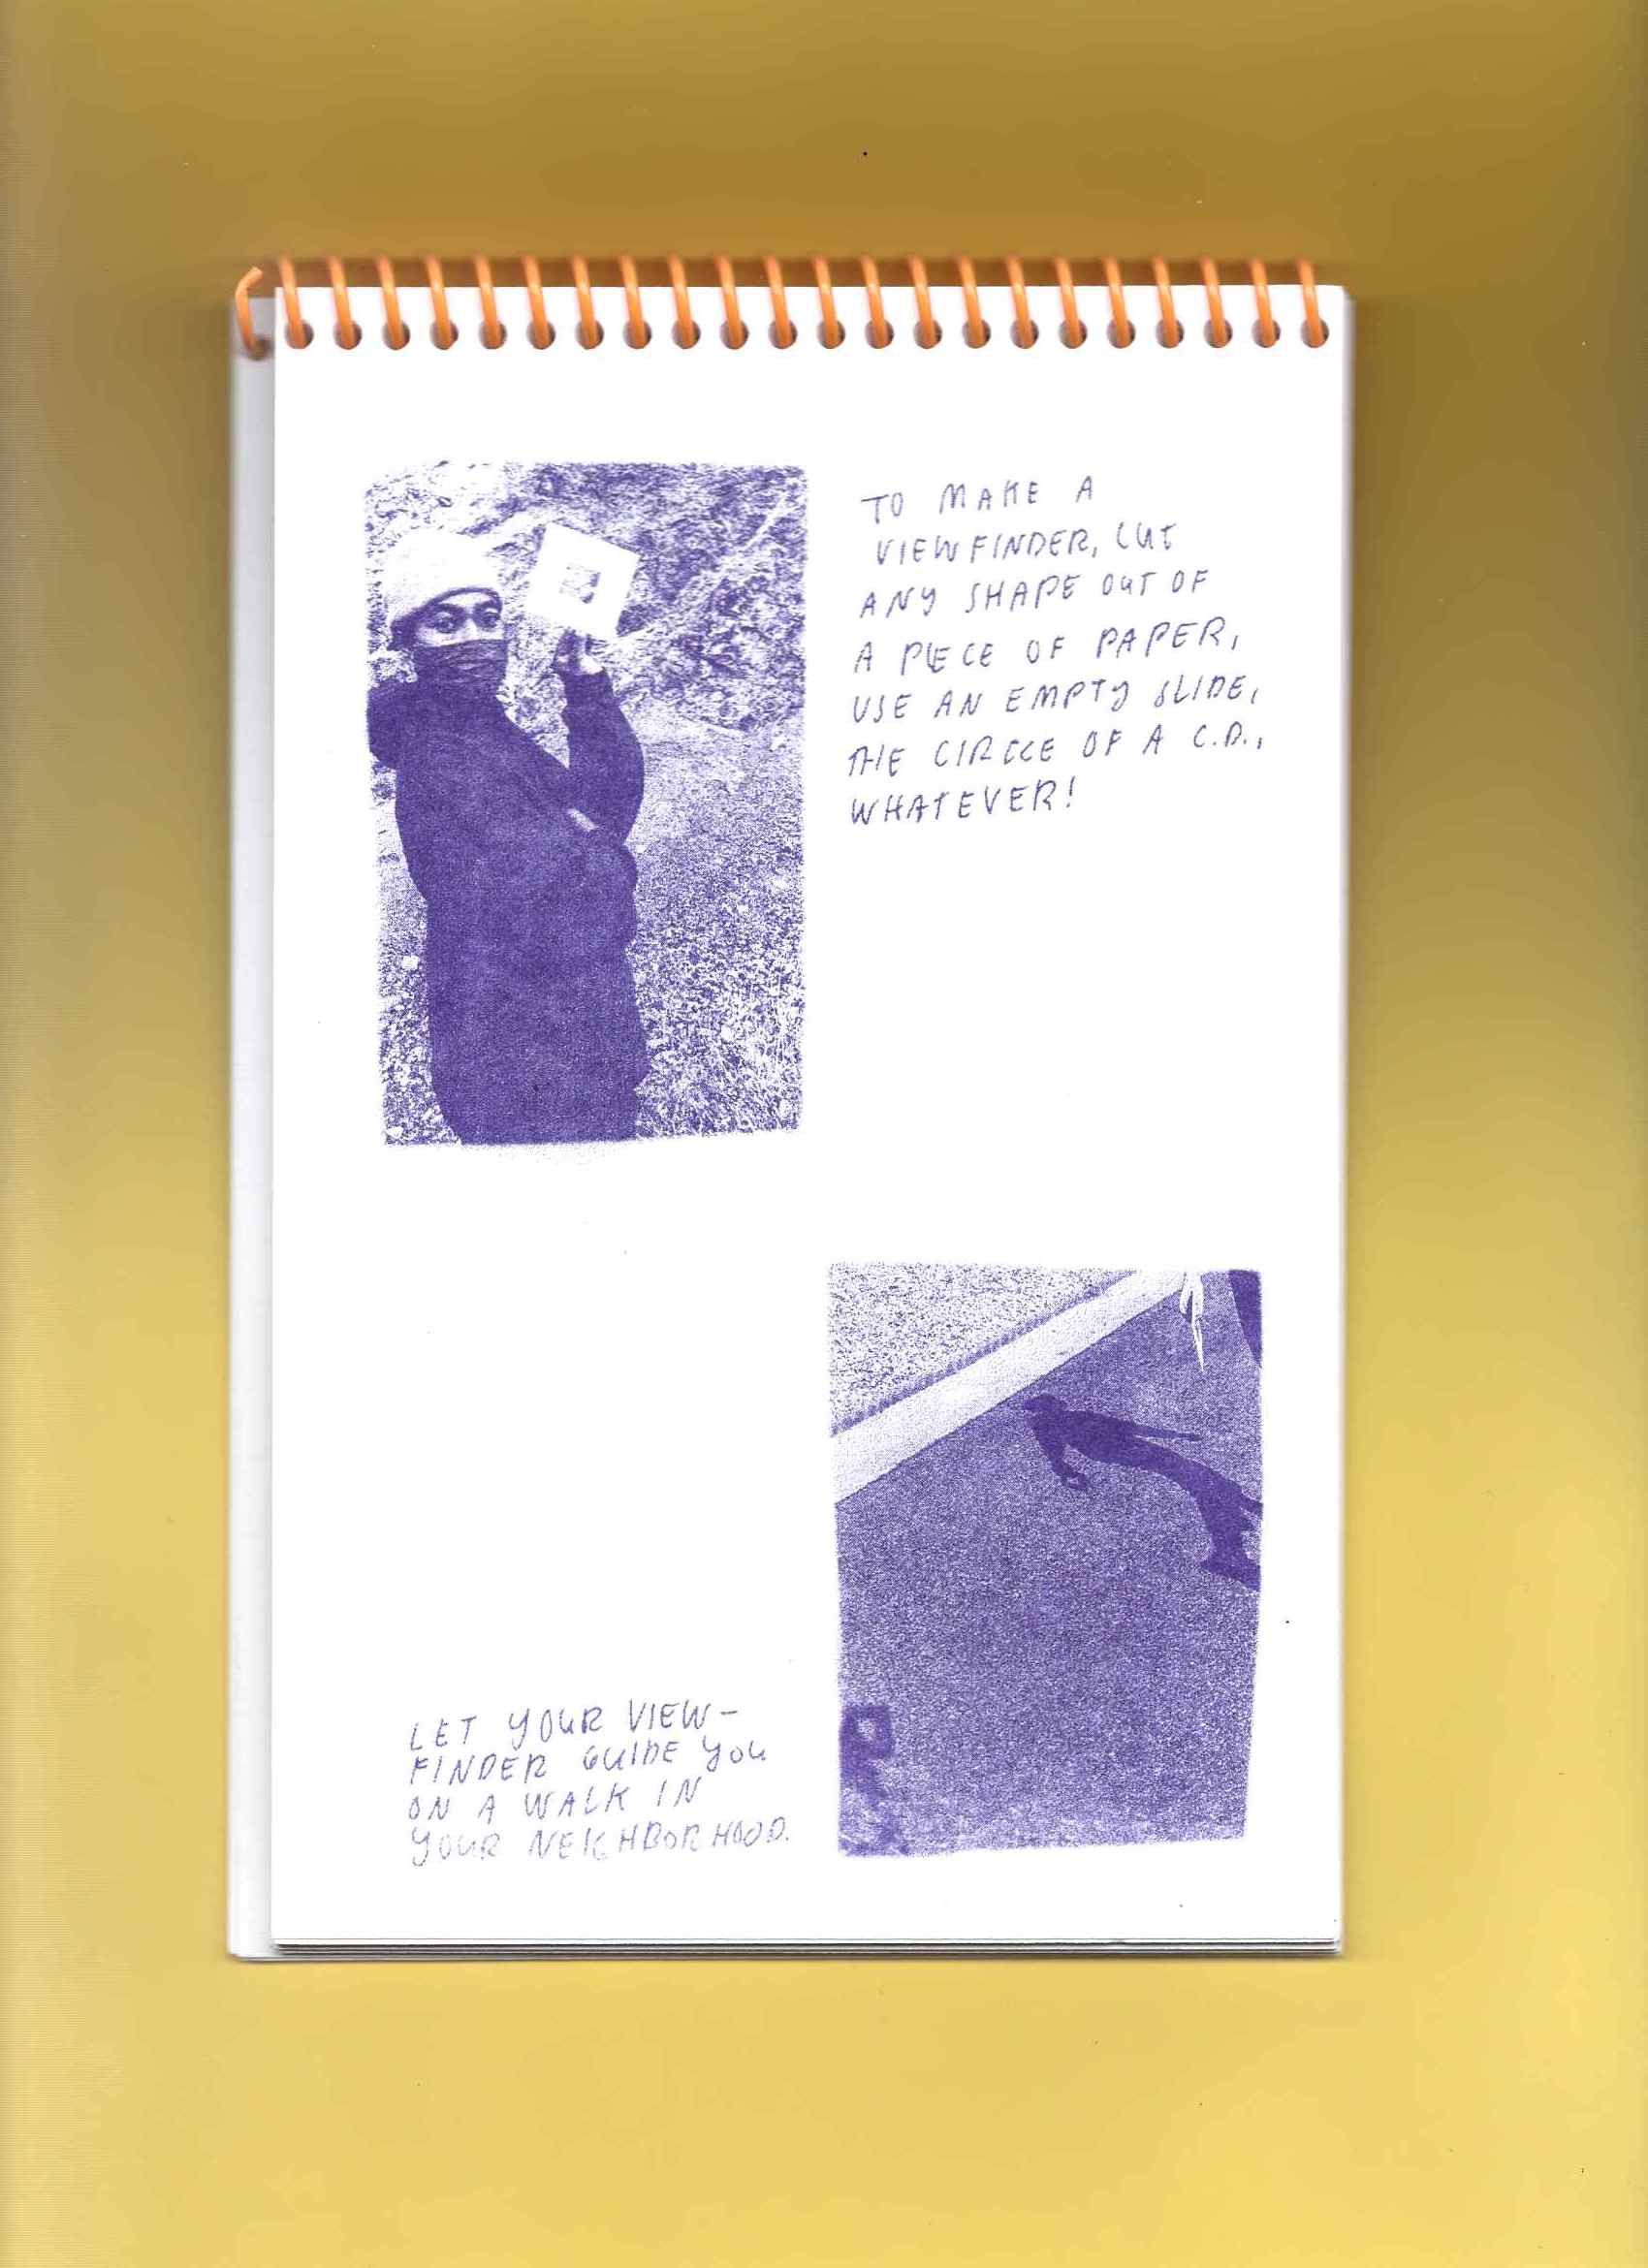 white spiral-bound notebook page with two images and handwritten text in purple ink